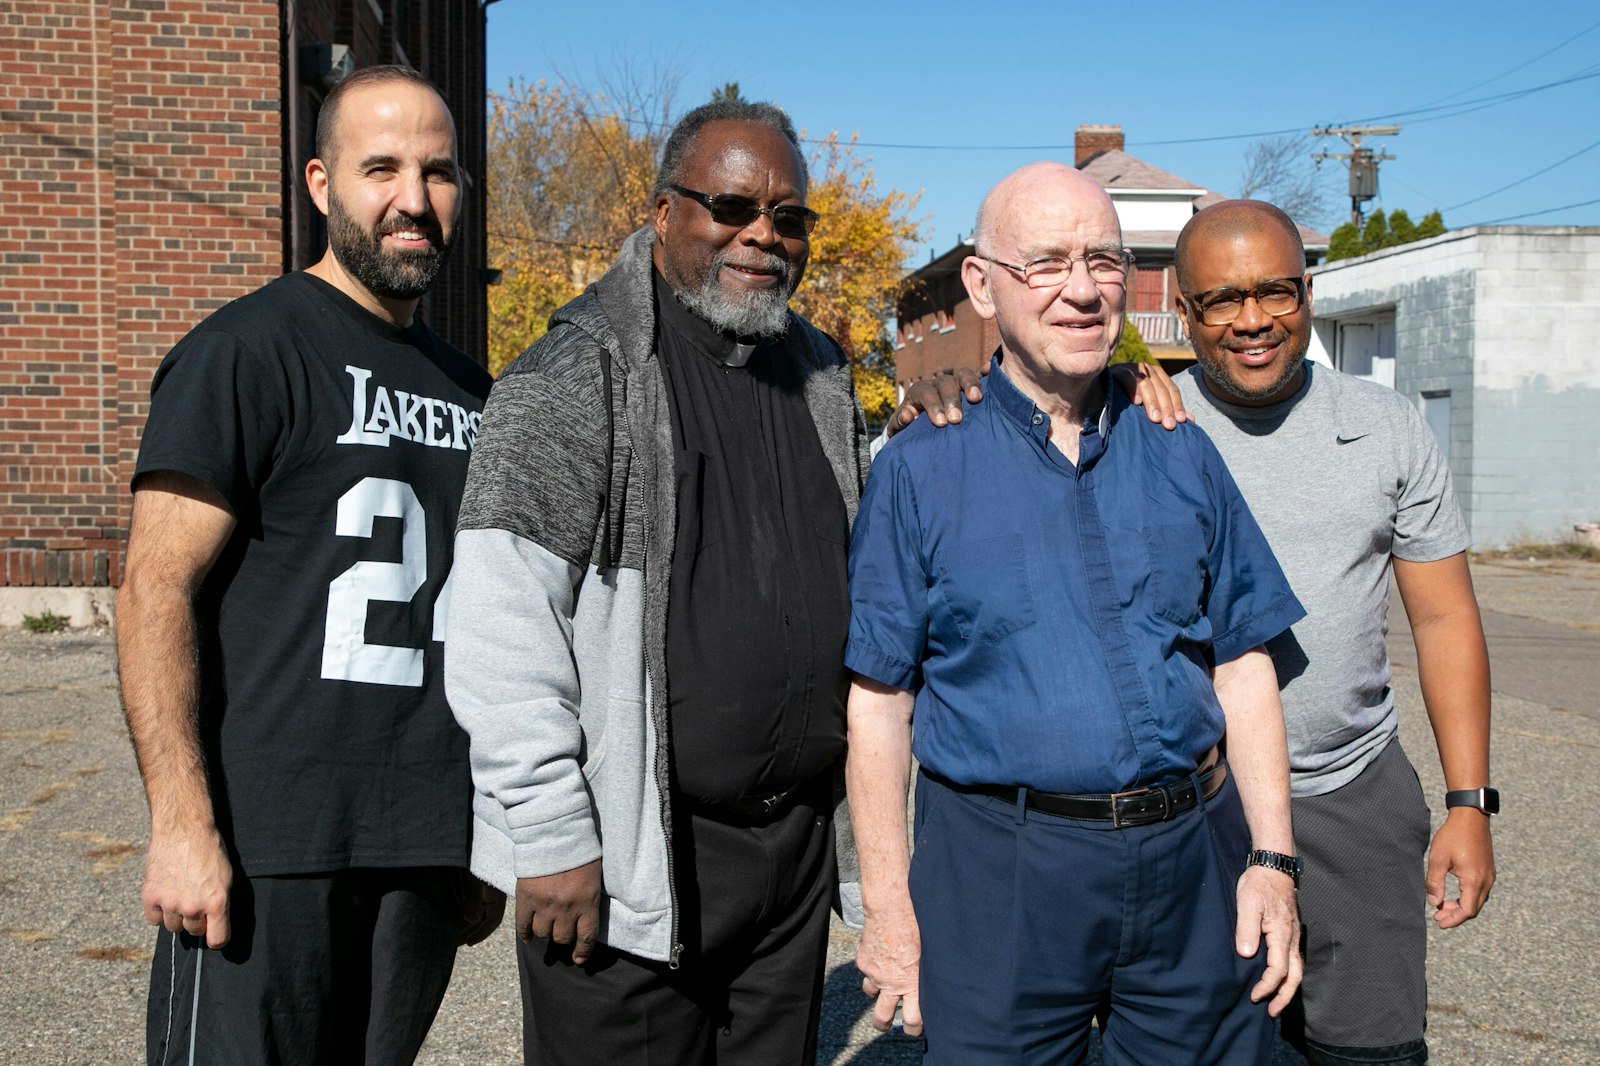 Left to right, Fr. Marko Djonovic of St. Moses the Black Parish, Fr. Theodore Parker of St. Charles Lwanga Parish, Fr. John Phelps, CSSR, of St. Peter Claver Parish, and Fr. John McKenzie of Christ the King Parish, all in Detroit. The Catholic community of Detroit has been instrumental in helping resurrect Ceciliaville as a place to benefit the entire community.